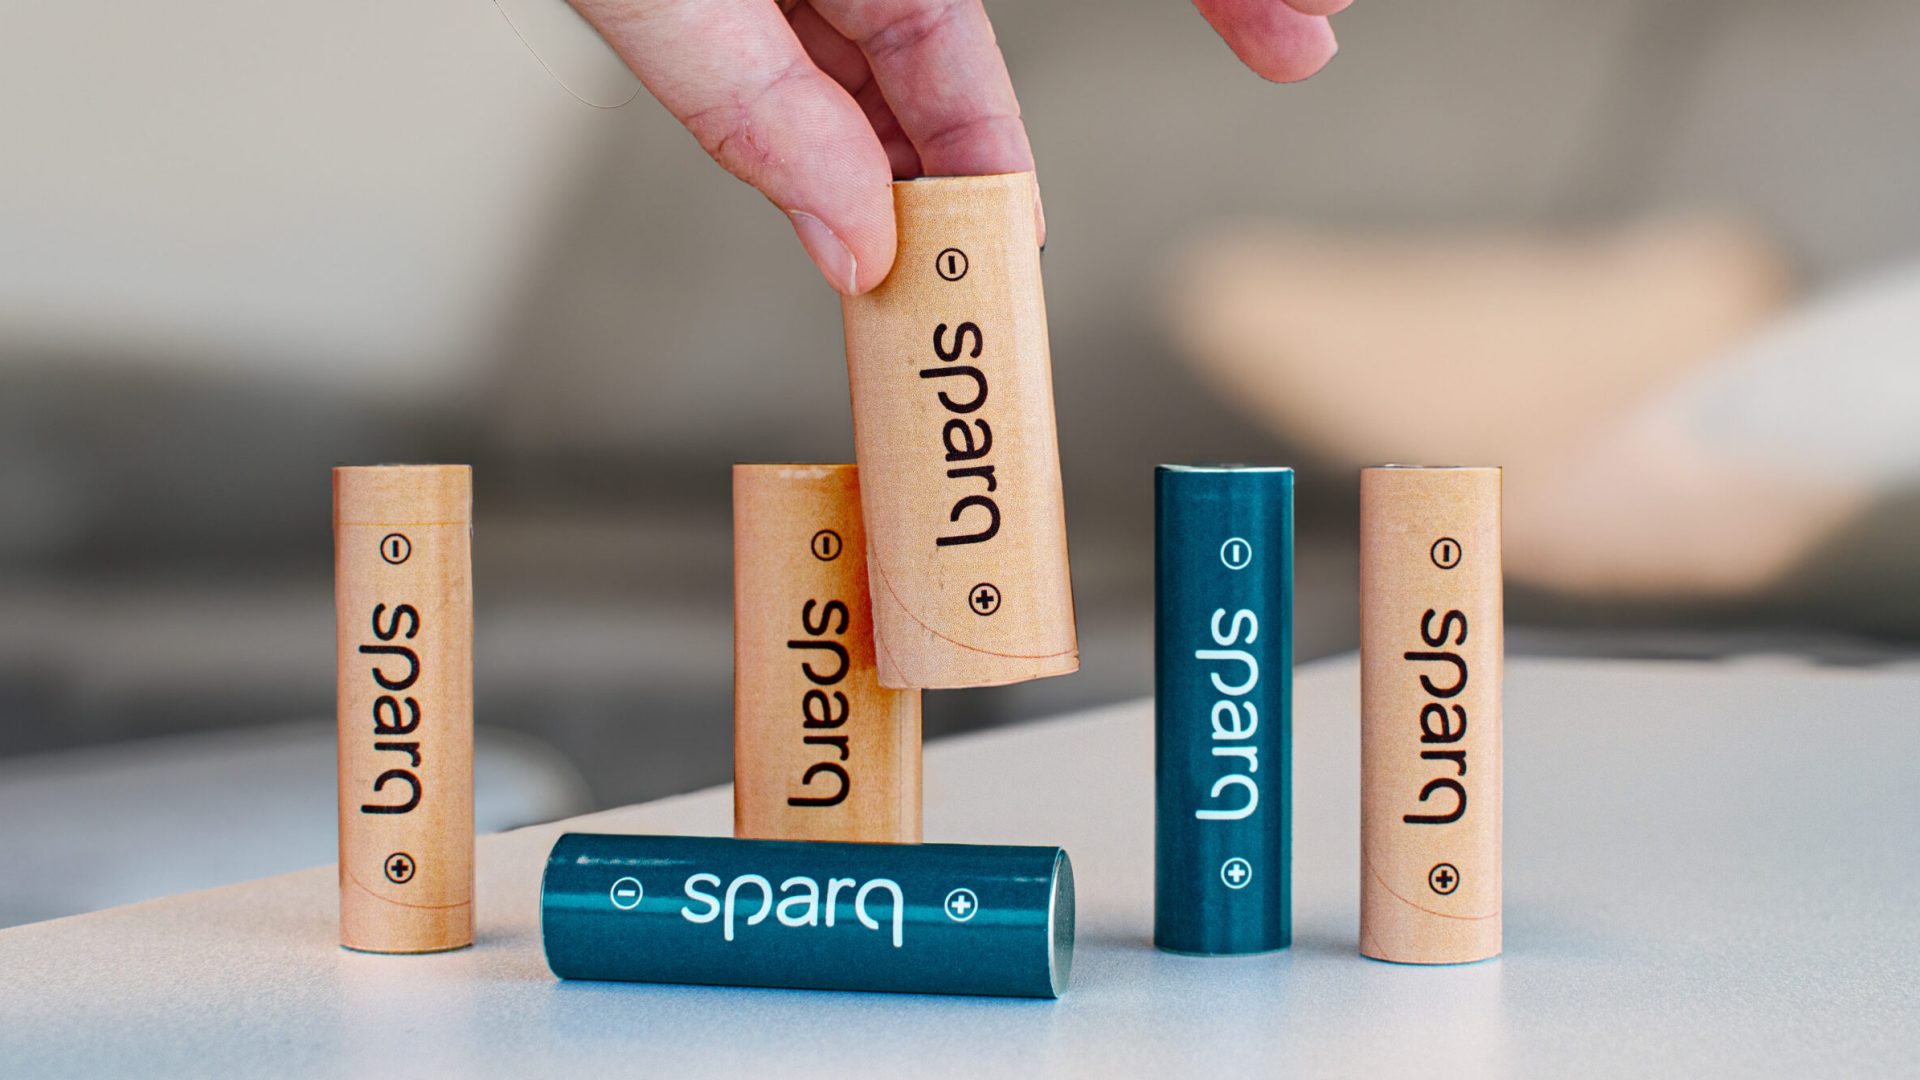 Batteries from Sparq.